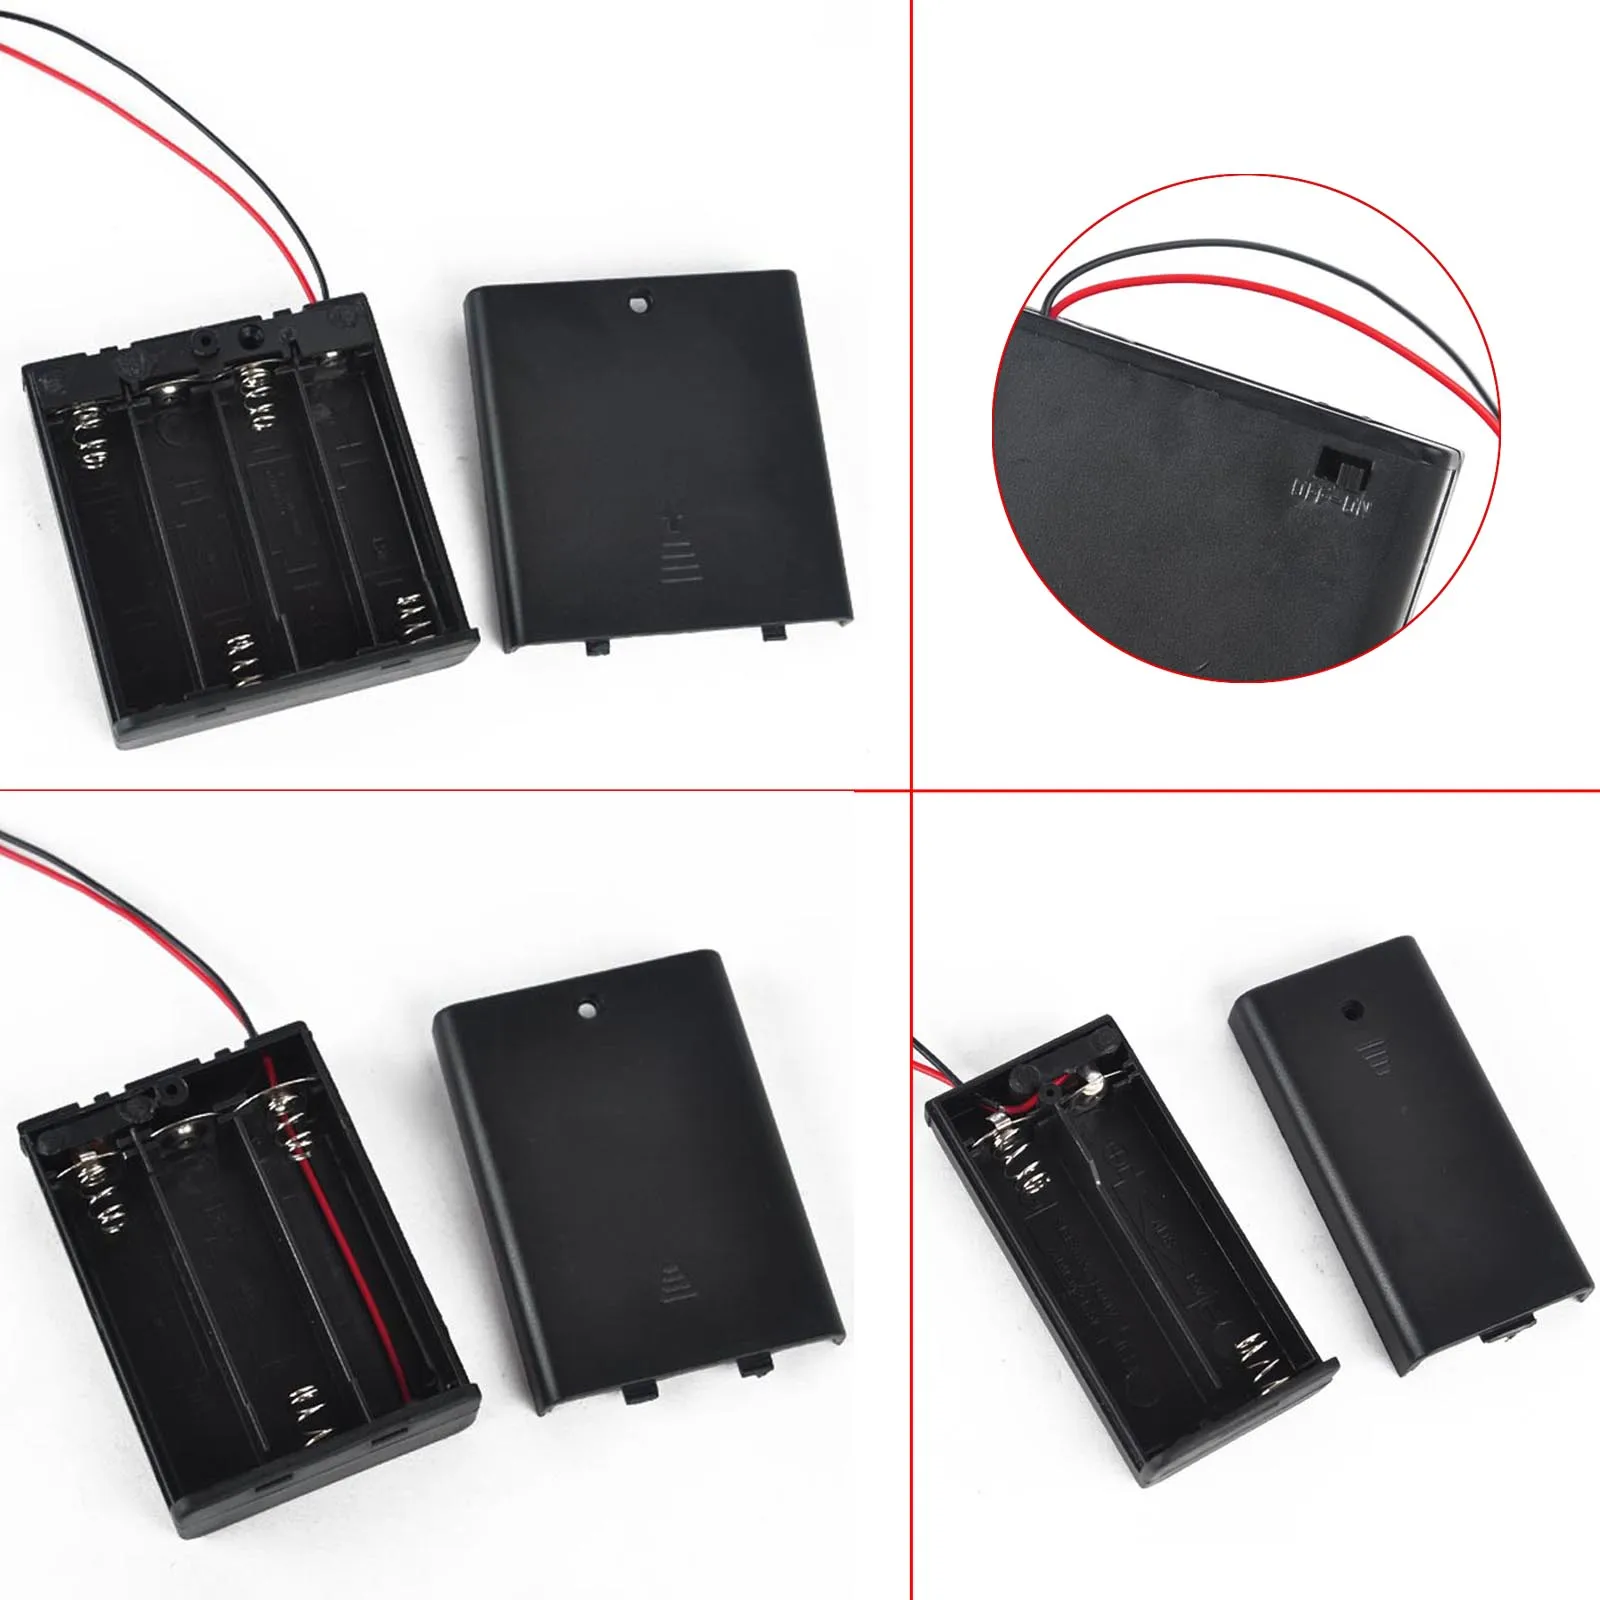 

6/4.5/3V AA Size Battery Storage Box Case Holder ON/OFF Power Switch Wire With 4/3/2 Slots Batteries Container Holder